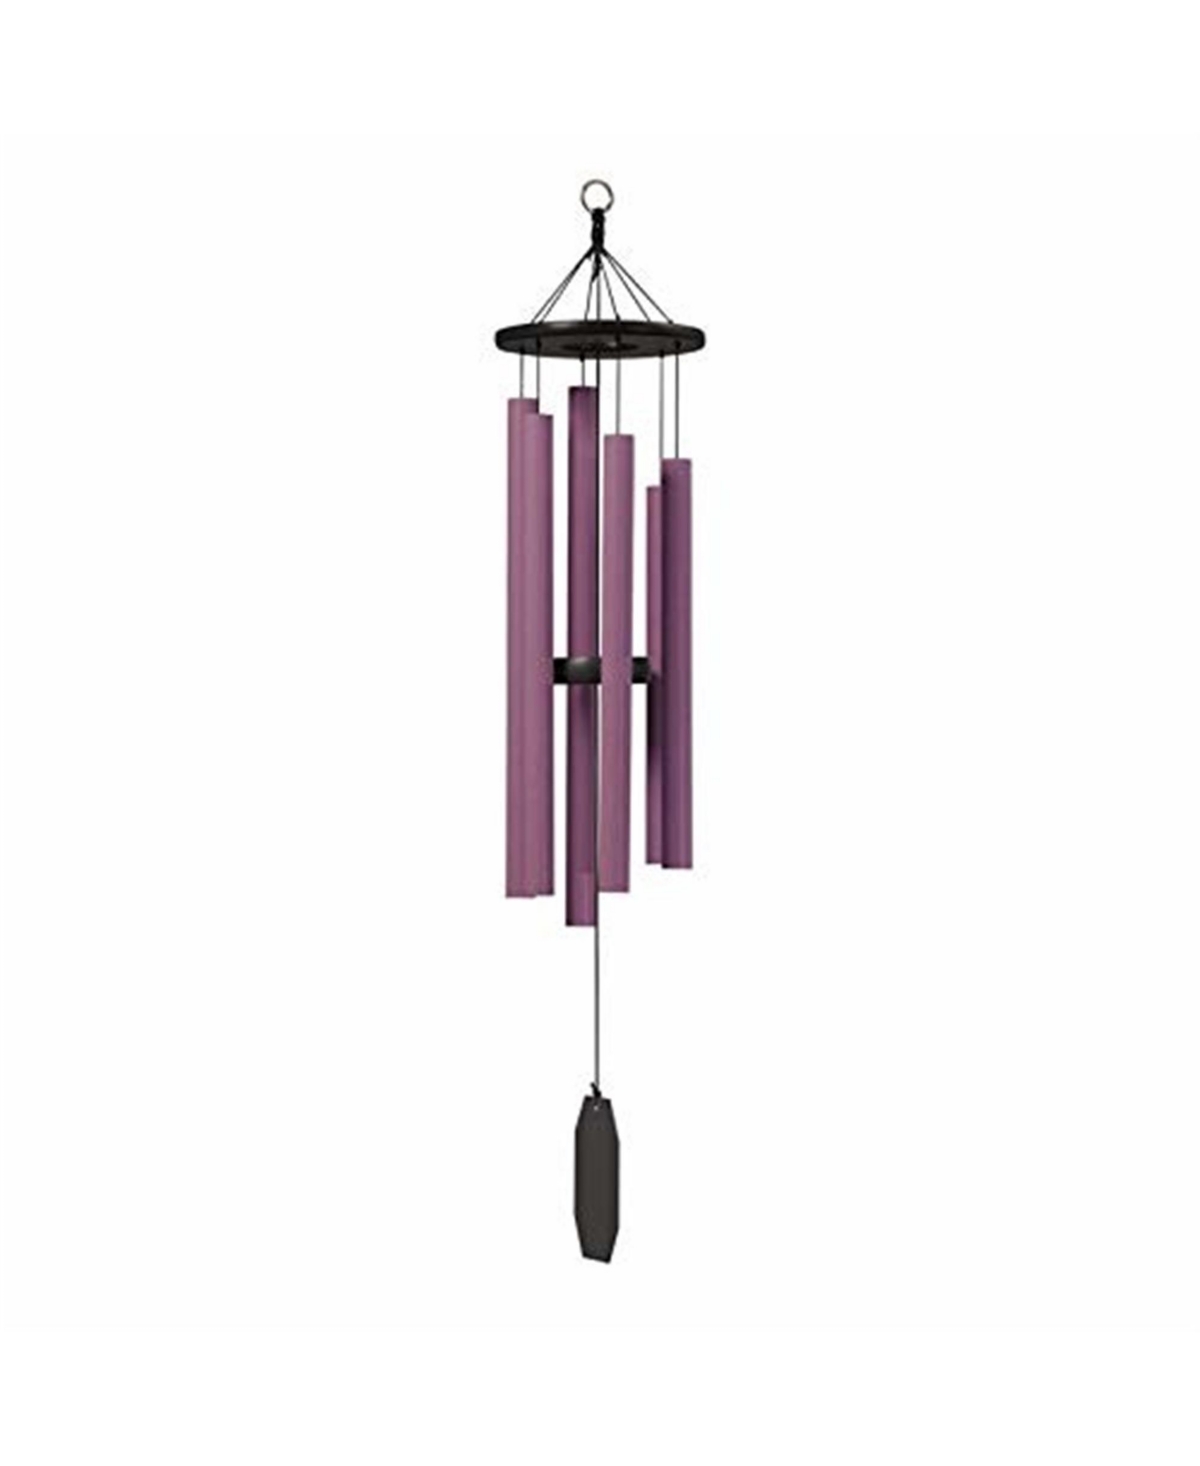 Bleeding Heart Wind Chime Amish Crafted Chime, 41in - Multi